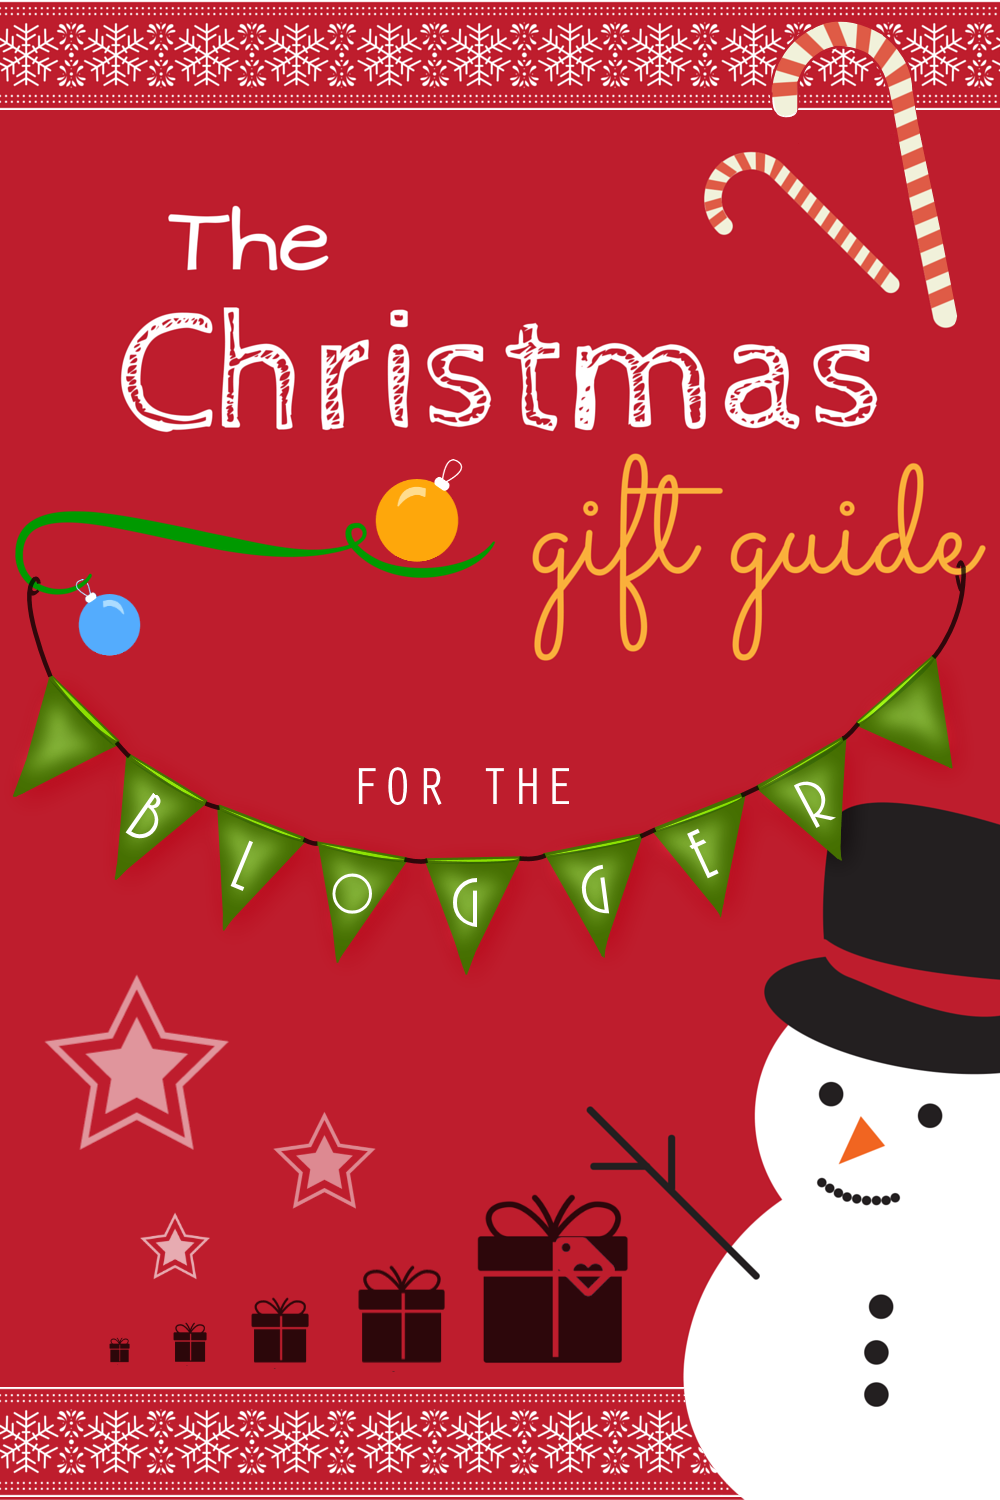 Christmas Gift Guide For The Blogger